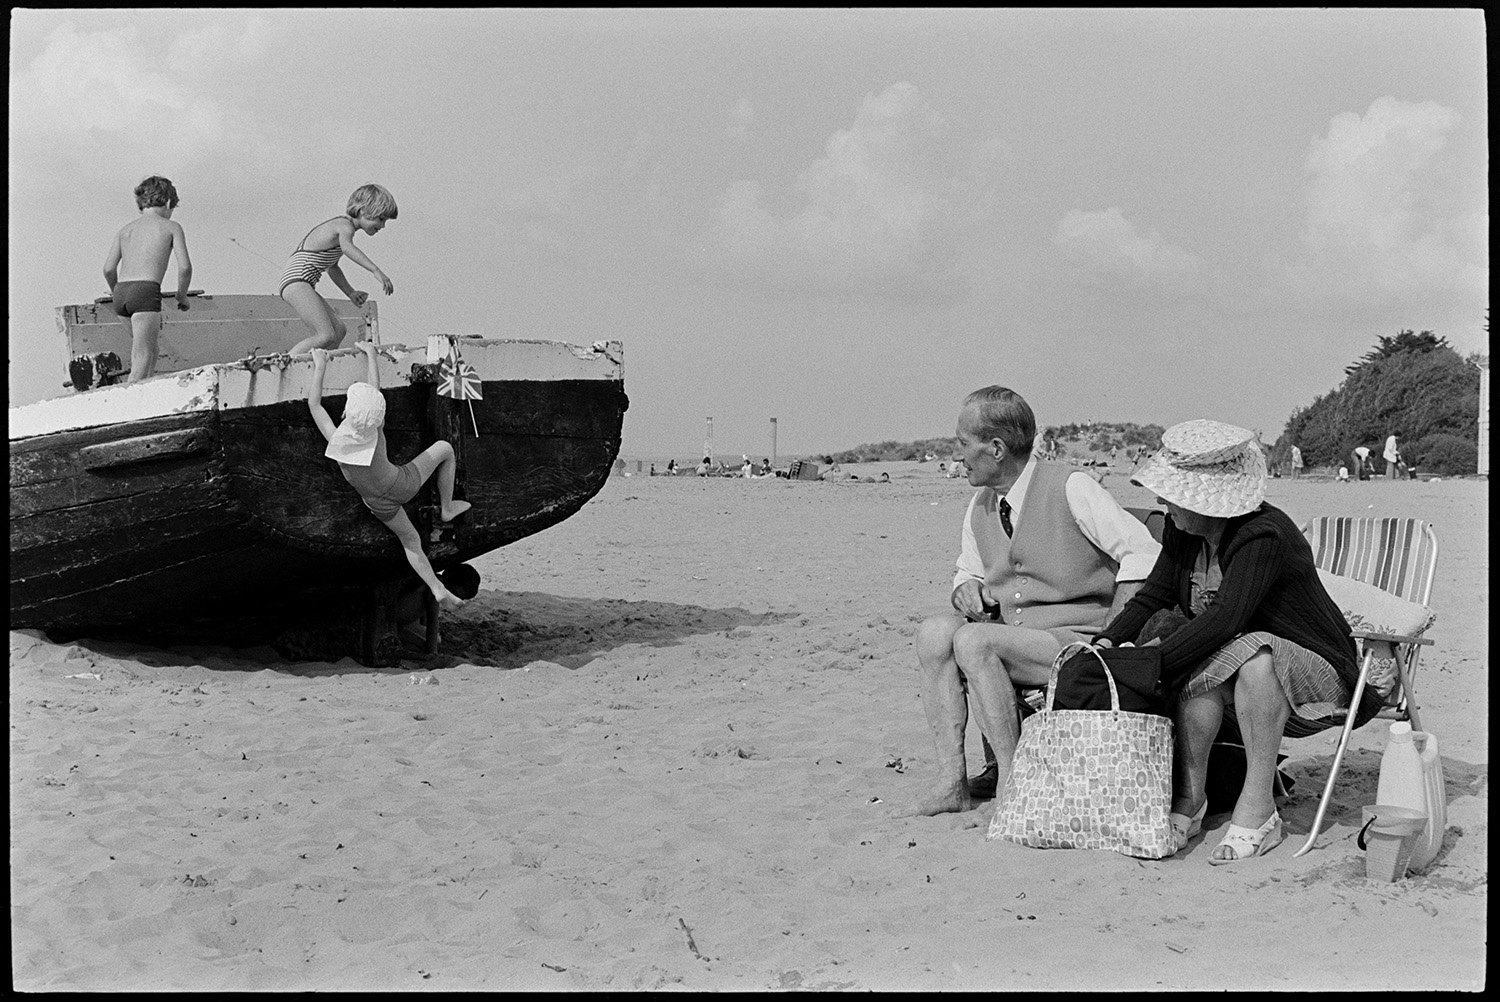 Beach with children playing on beached barge. 
[A man and woman sat on garden chairs on Instow beach. They are watching three children playing on a beached barge on the sand.]